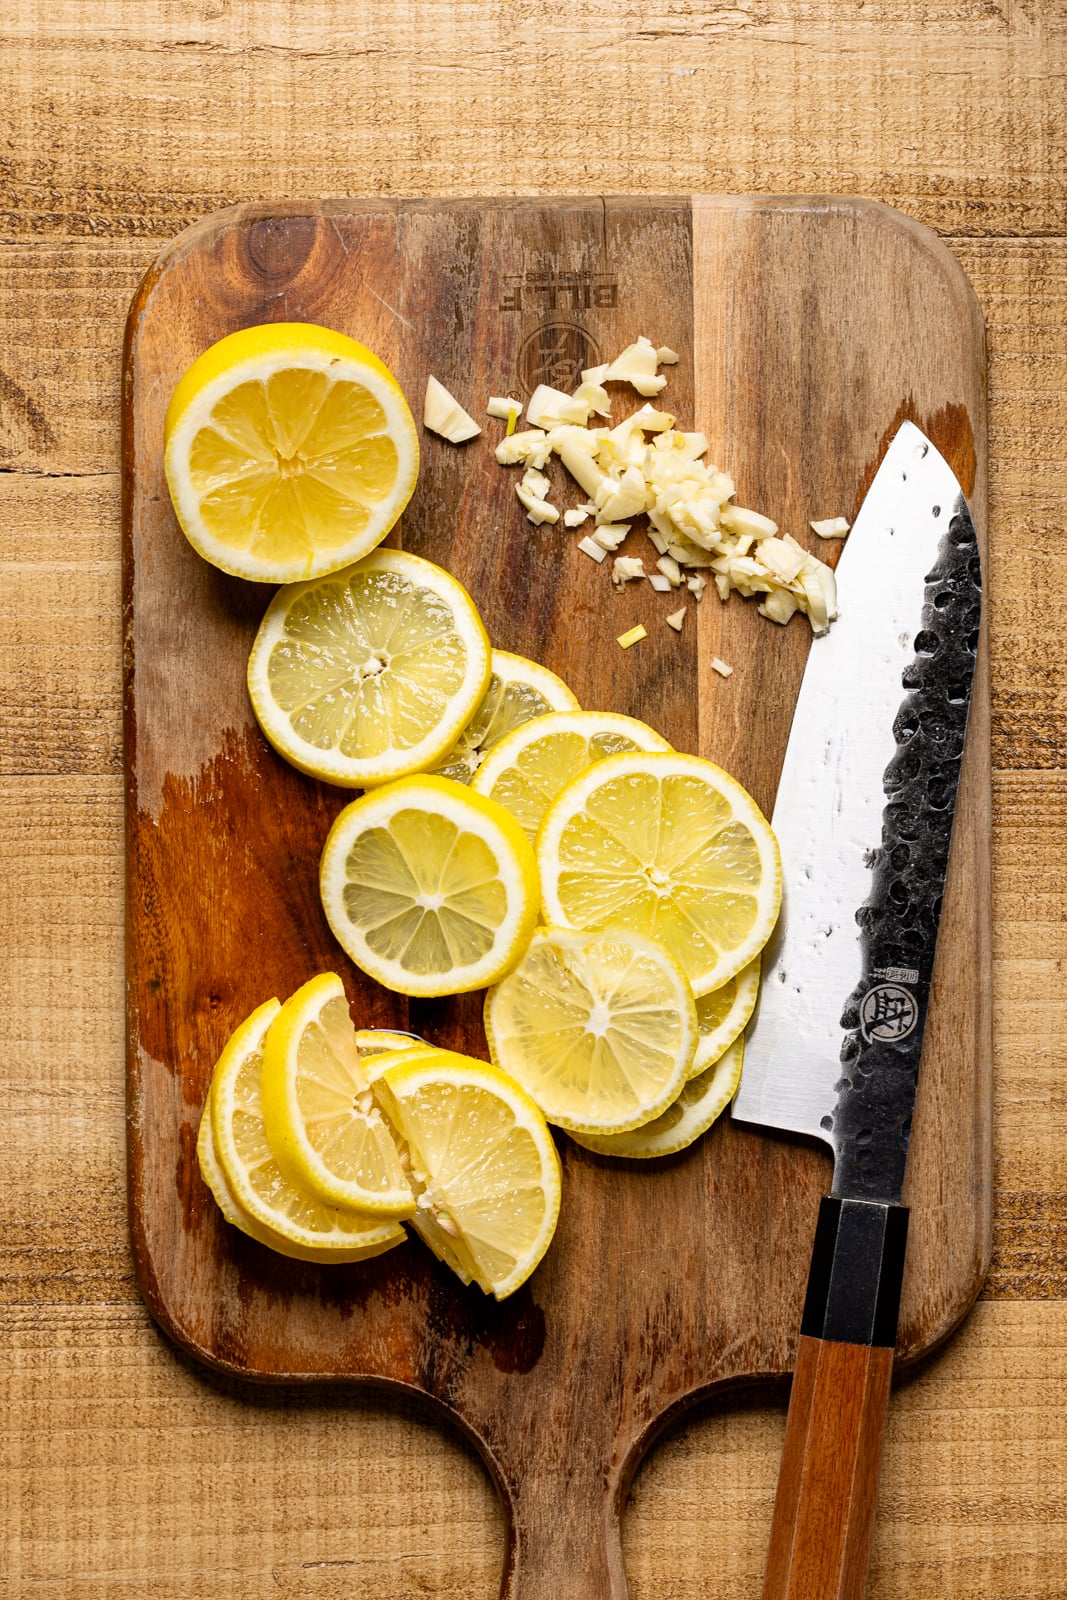 Lemon slices and minced garlic on a wood cutting board with a knife.